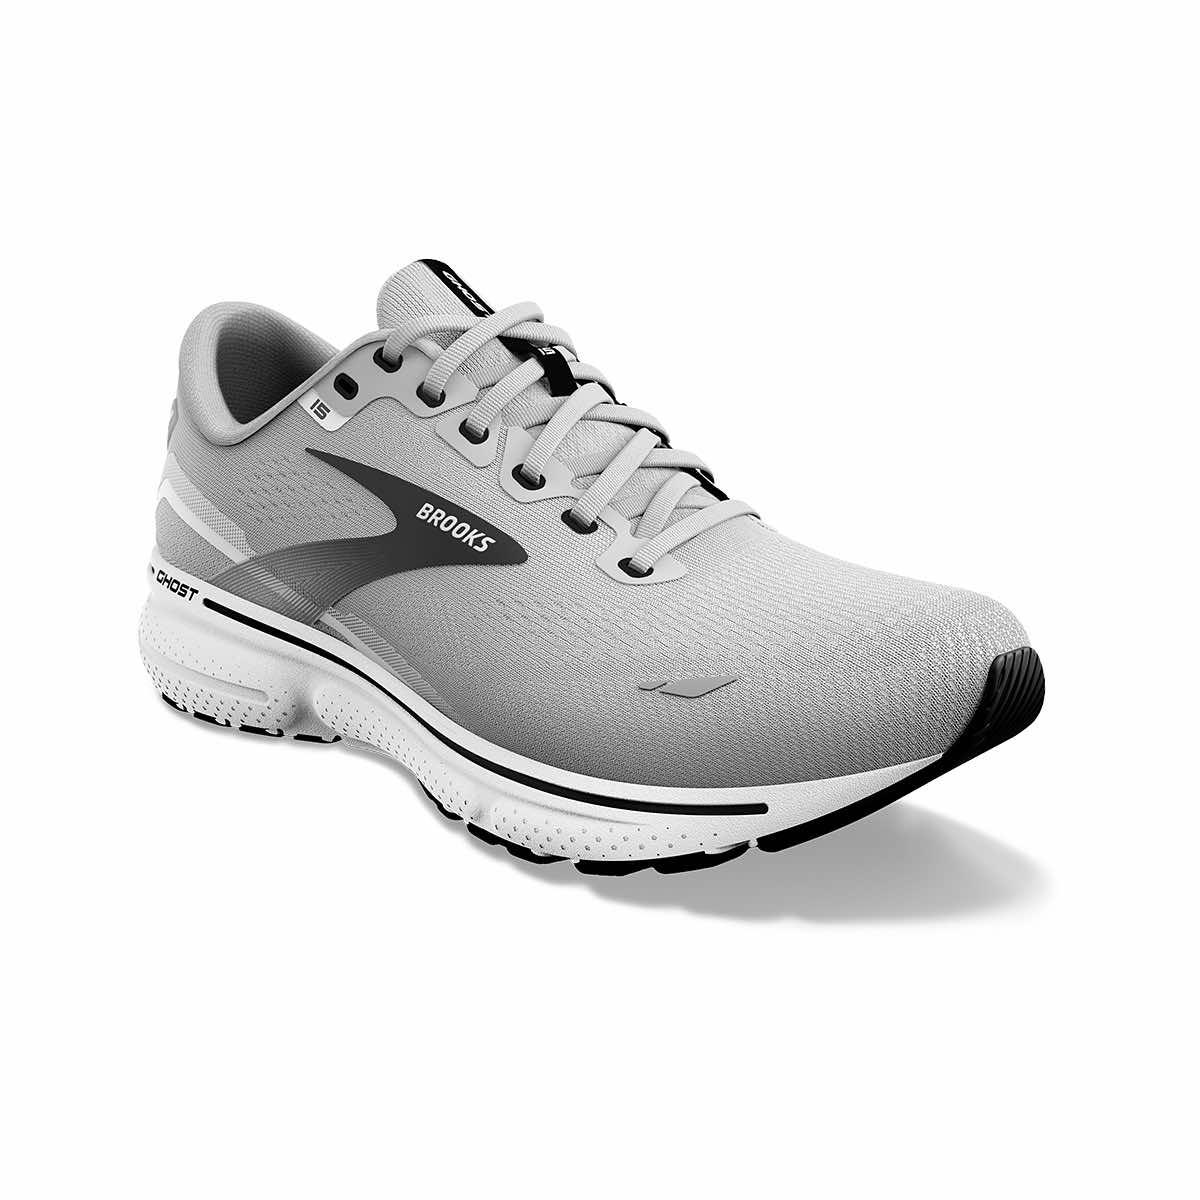  Men's Ghost 15 Running Shoes